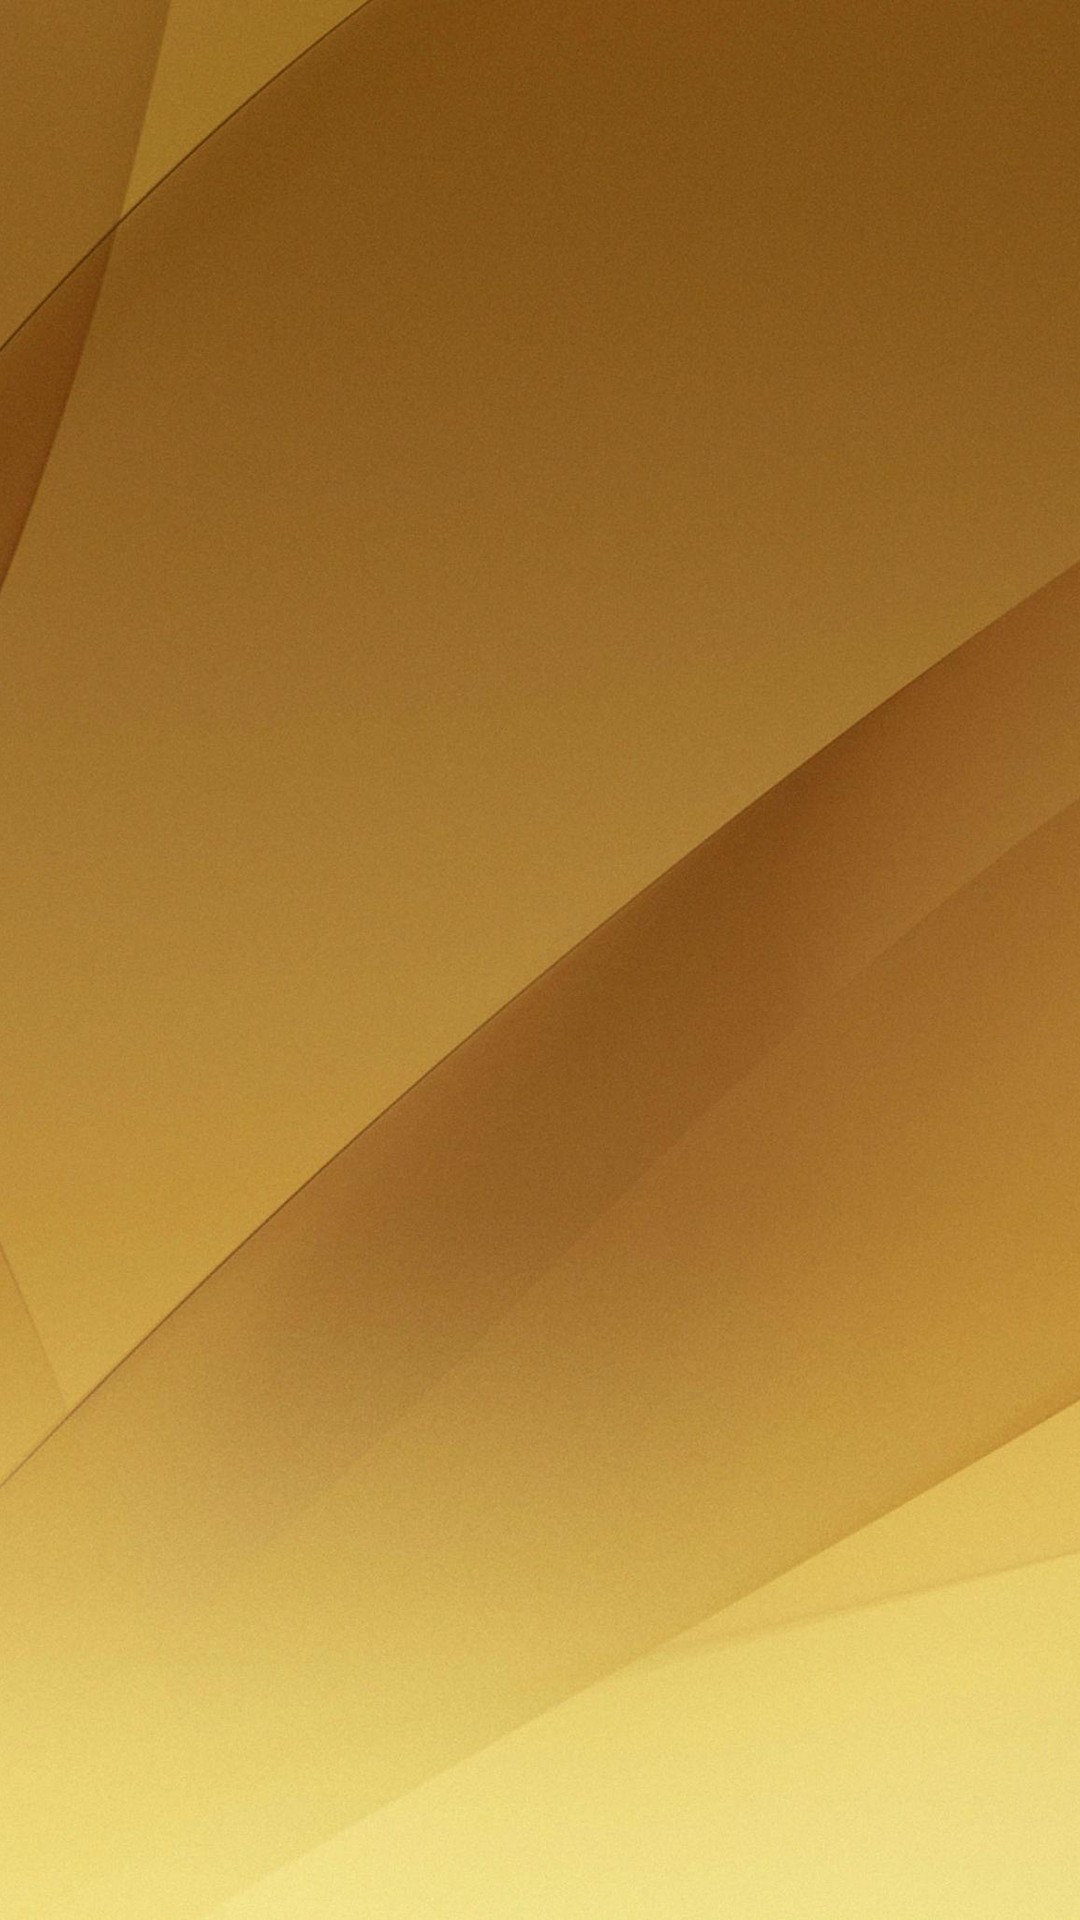 Golden Wallpaper For Android with HD resolution 1080x1920